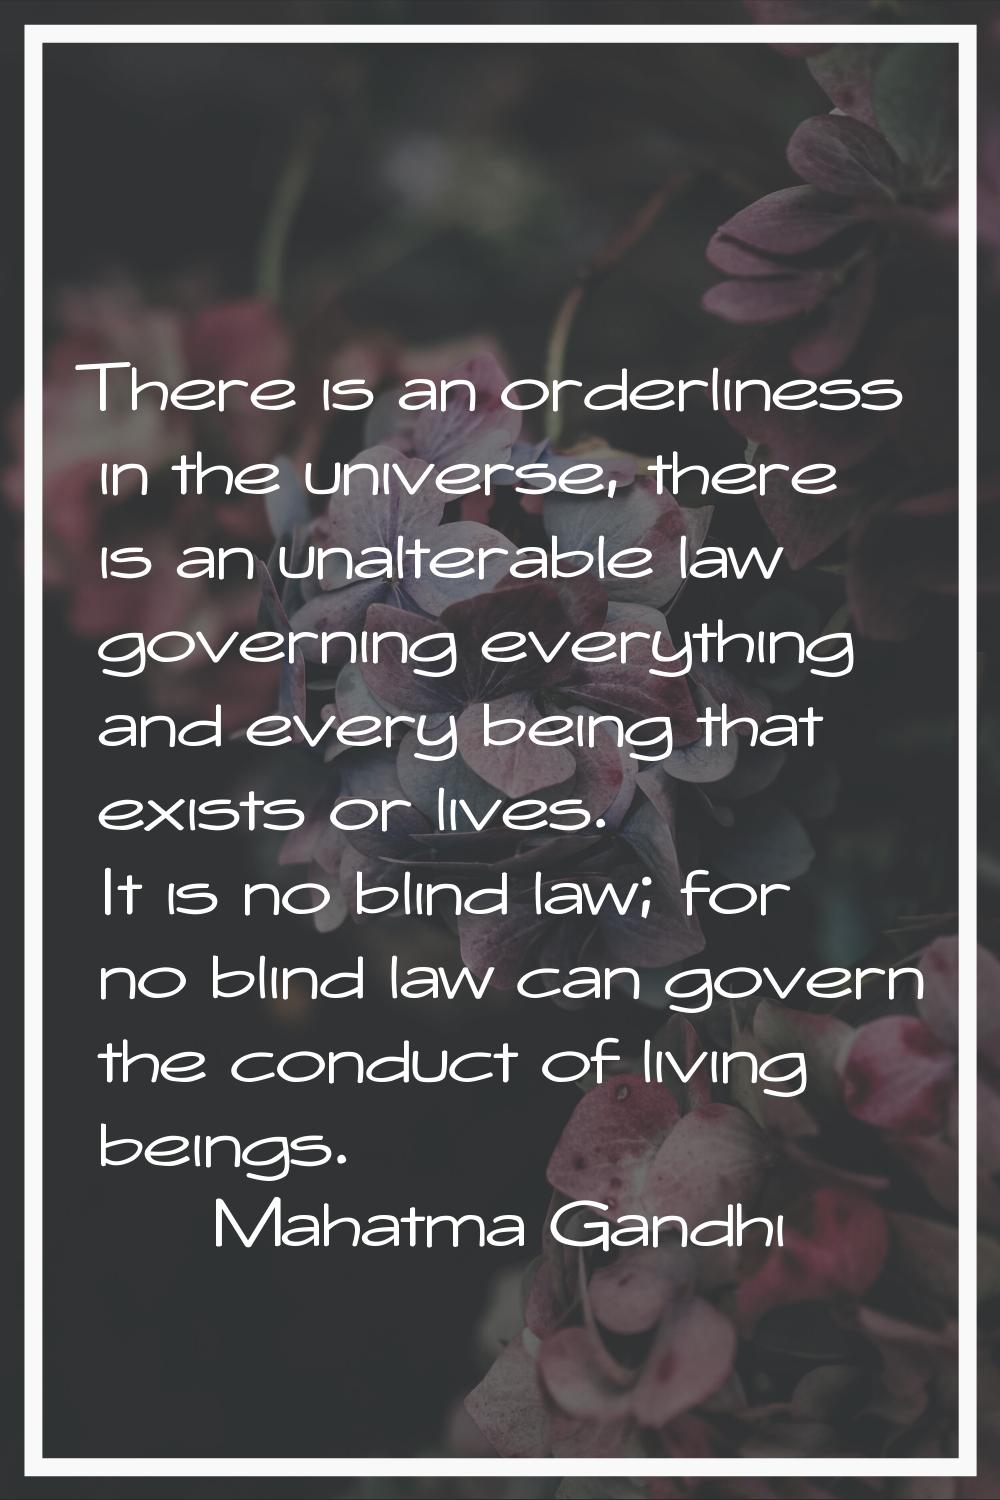 There is an orderliness in the universe, there is an unalterable law governing everything and every